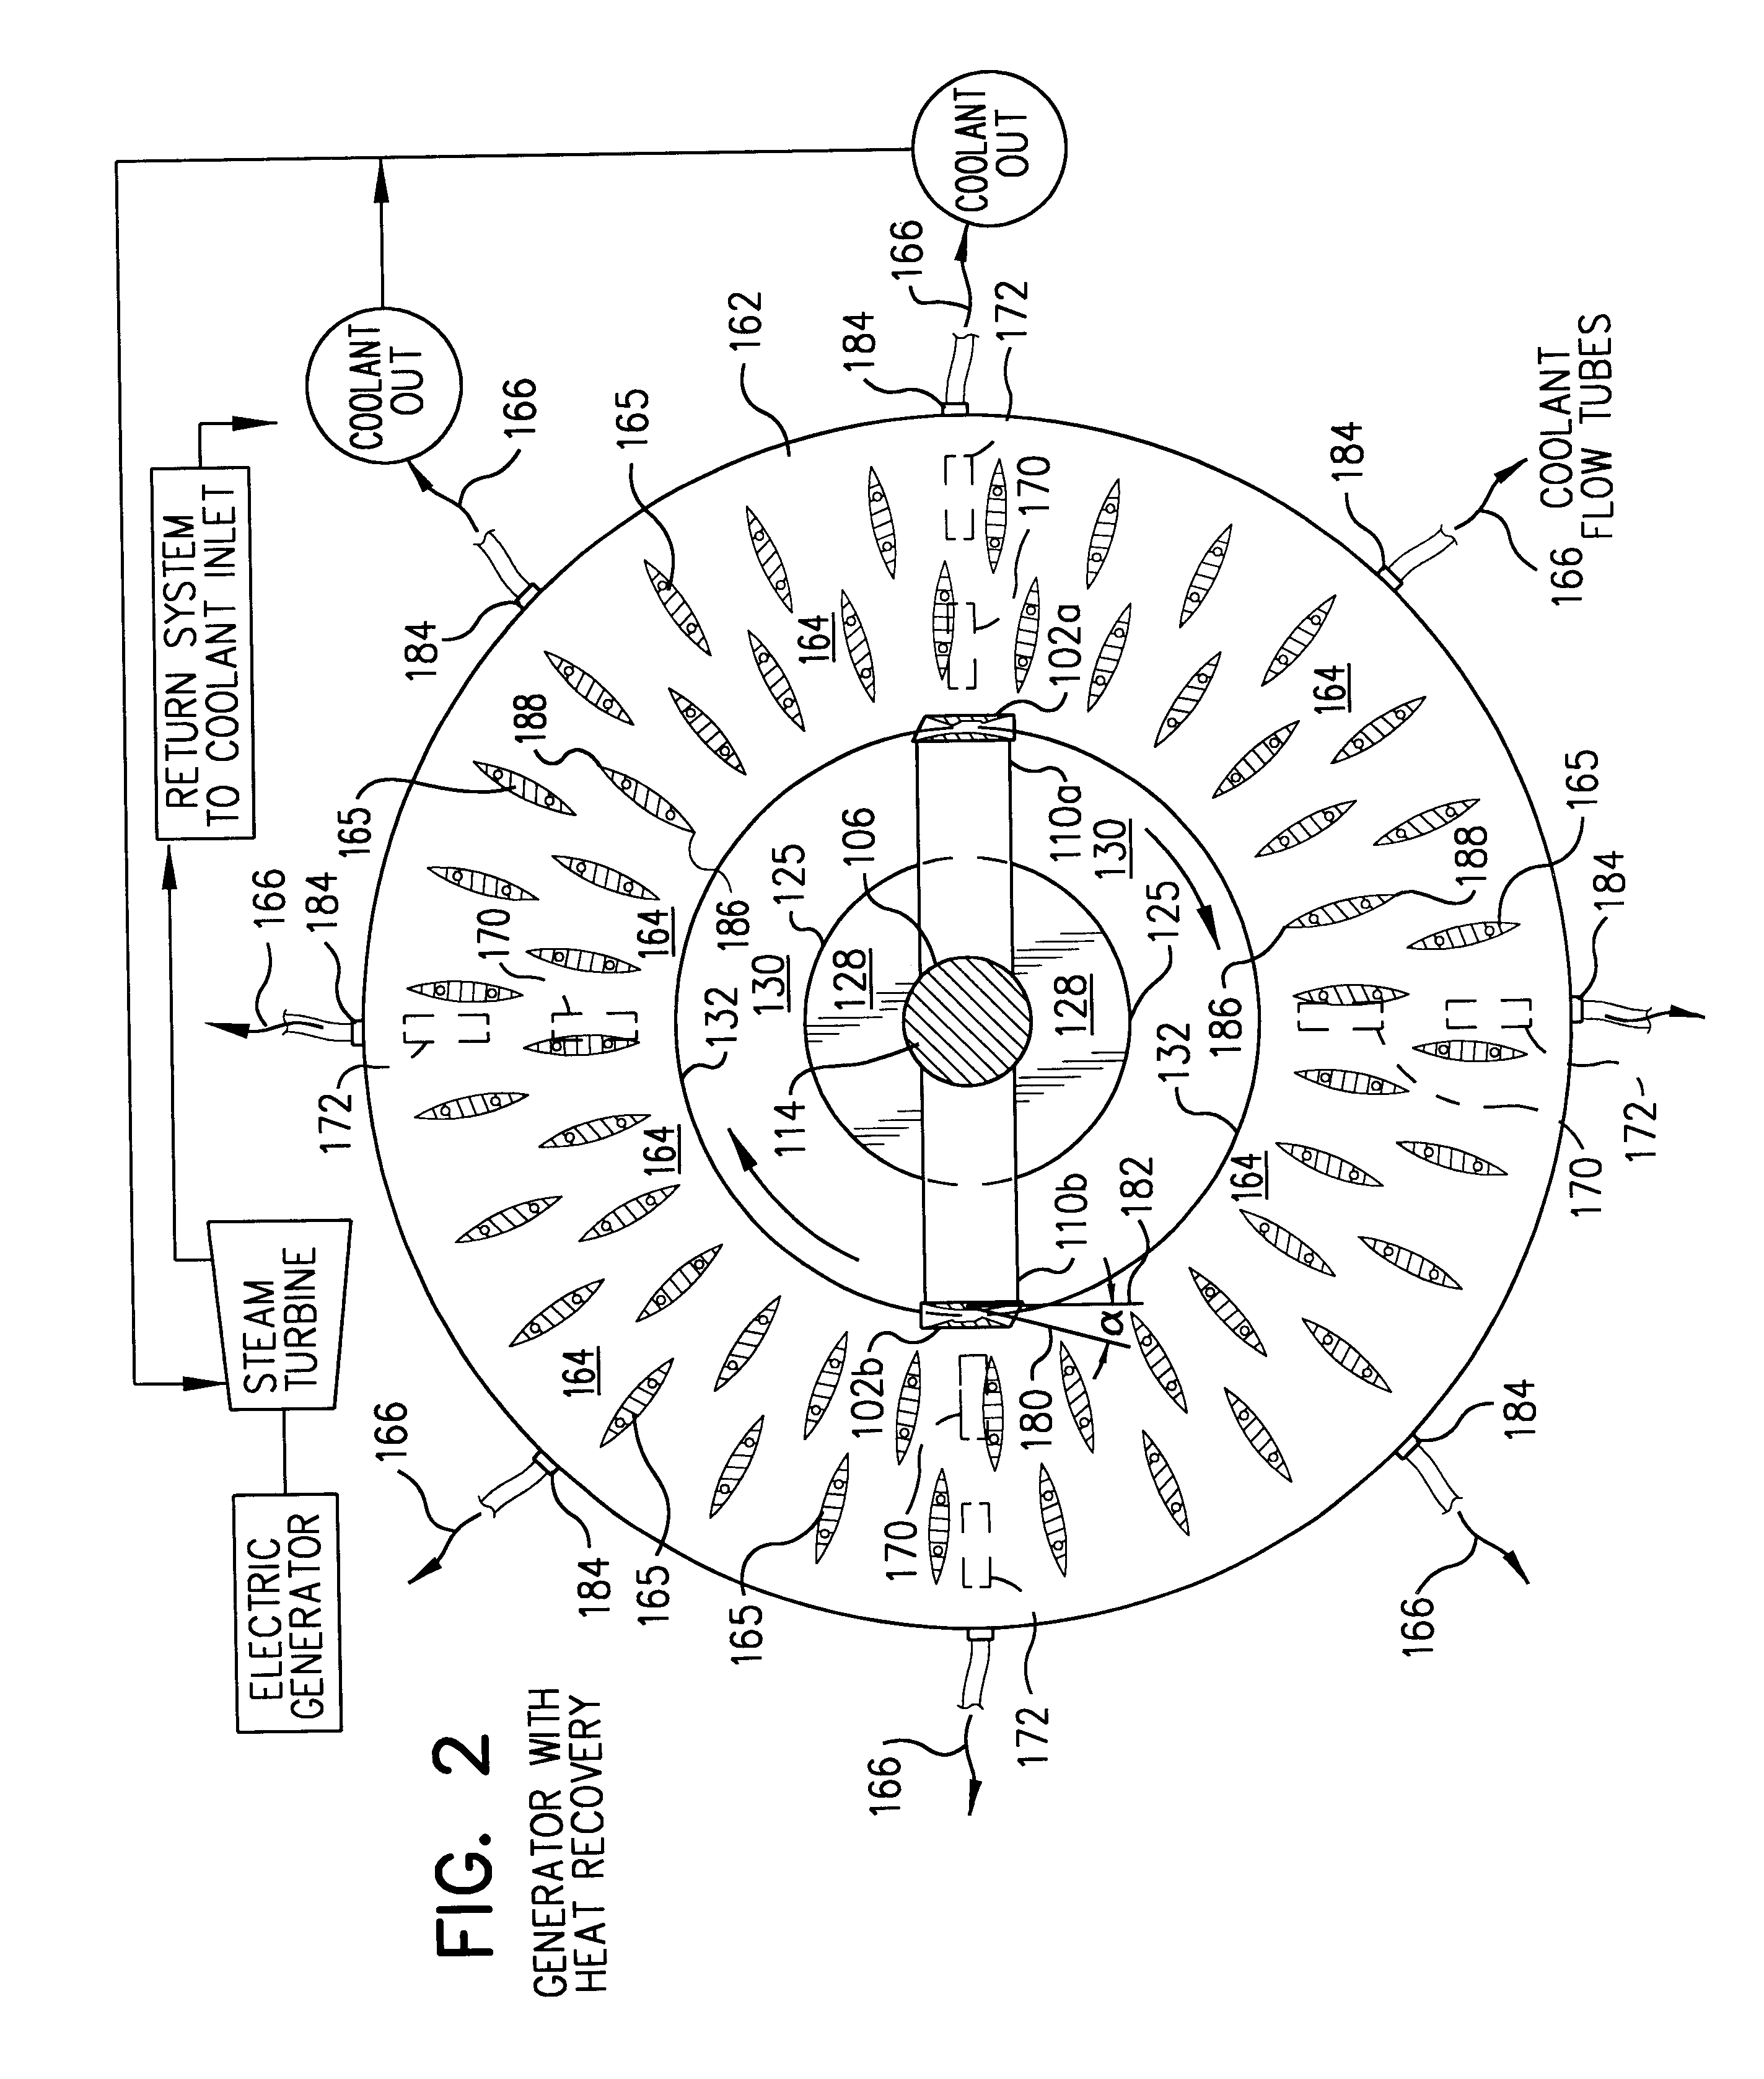 Apparatus for power generation with low drag rotor and ramjet assembly